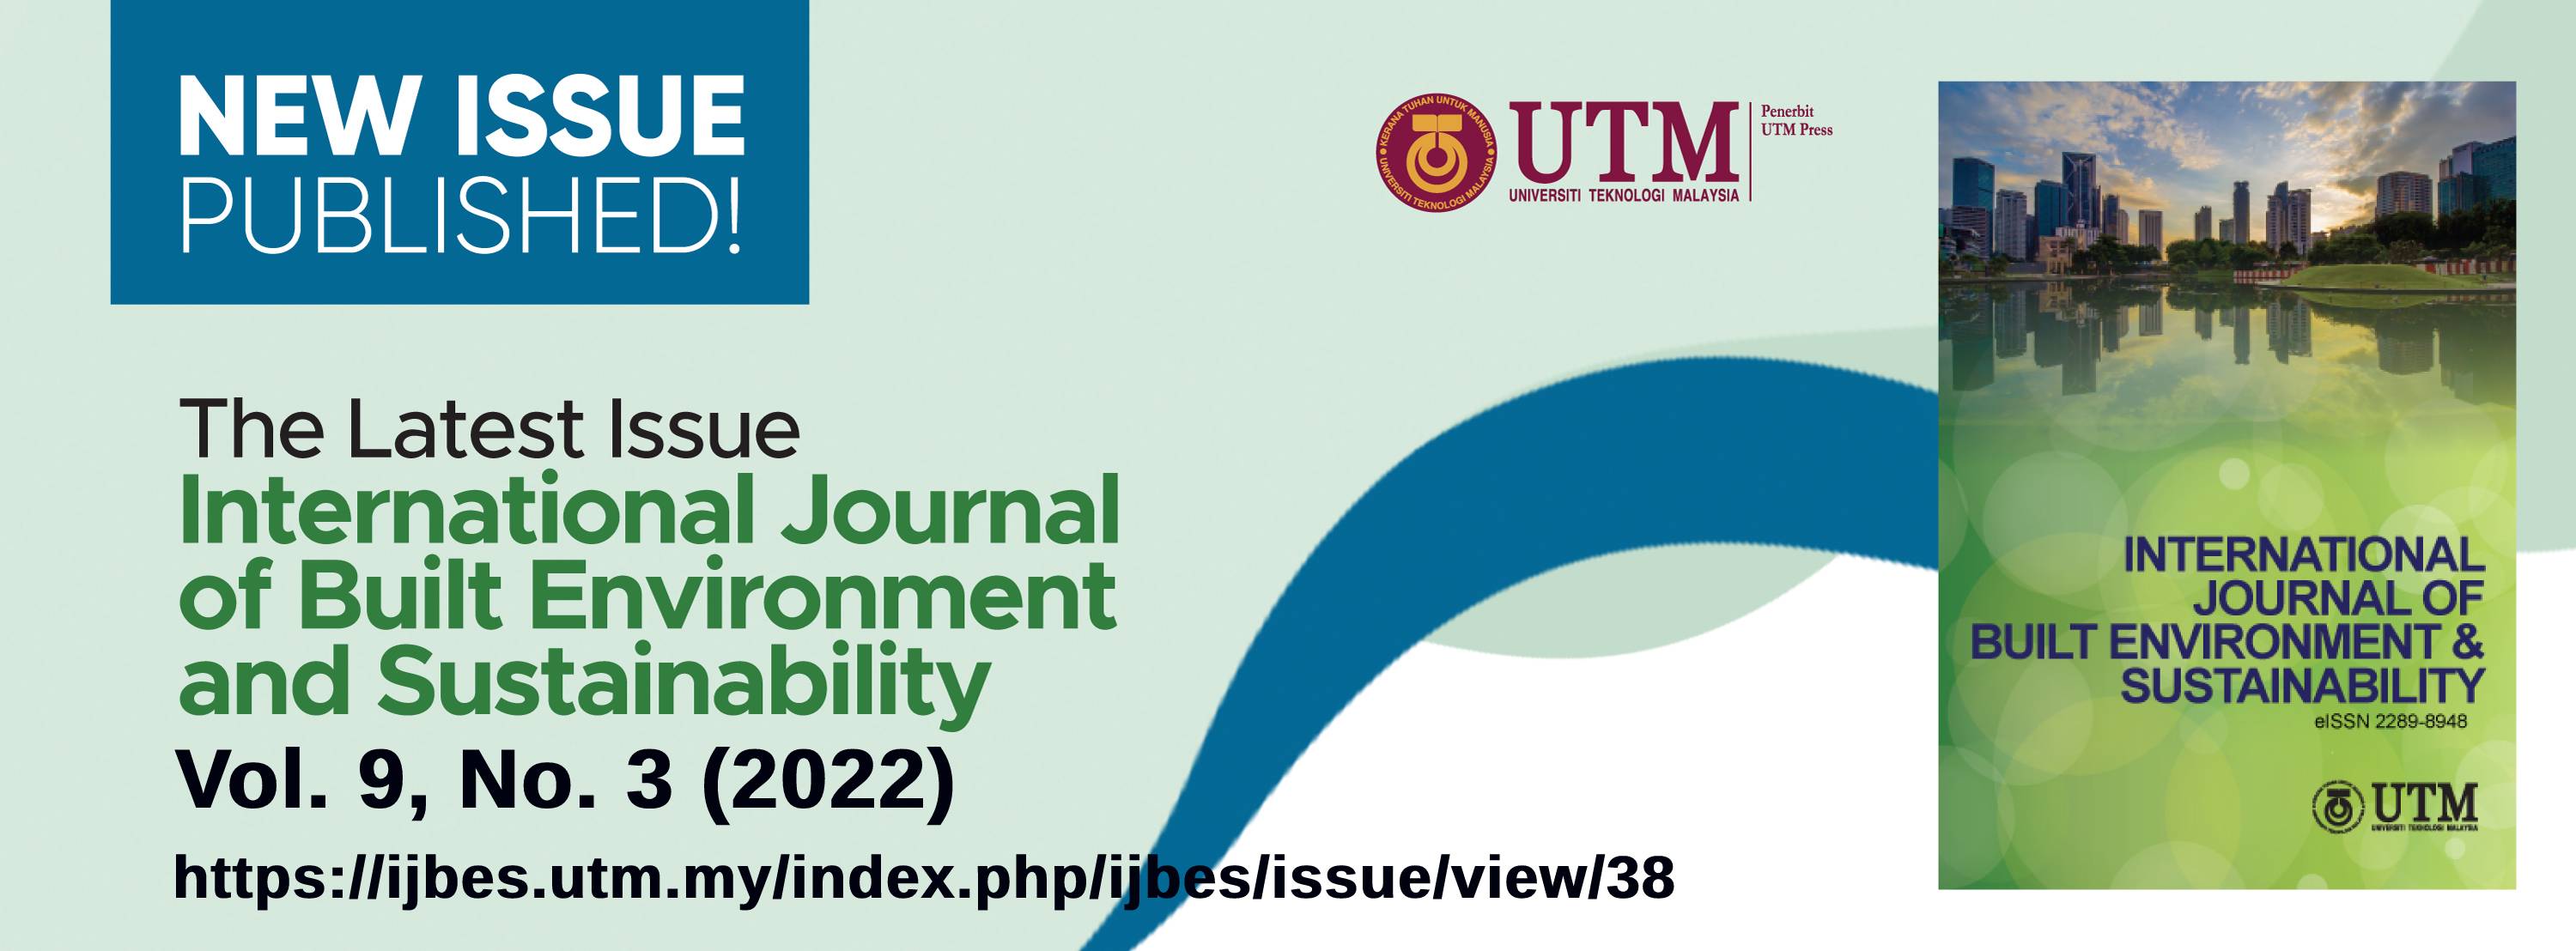 					View Vol. 9 No. 3 (2022): International Journal of Built Environment and Sustainability, Volume 9, Issue 3, 2022
				